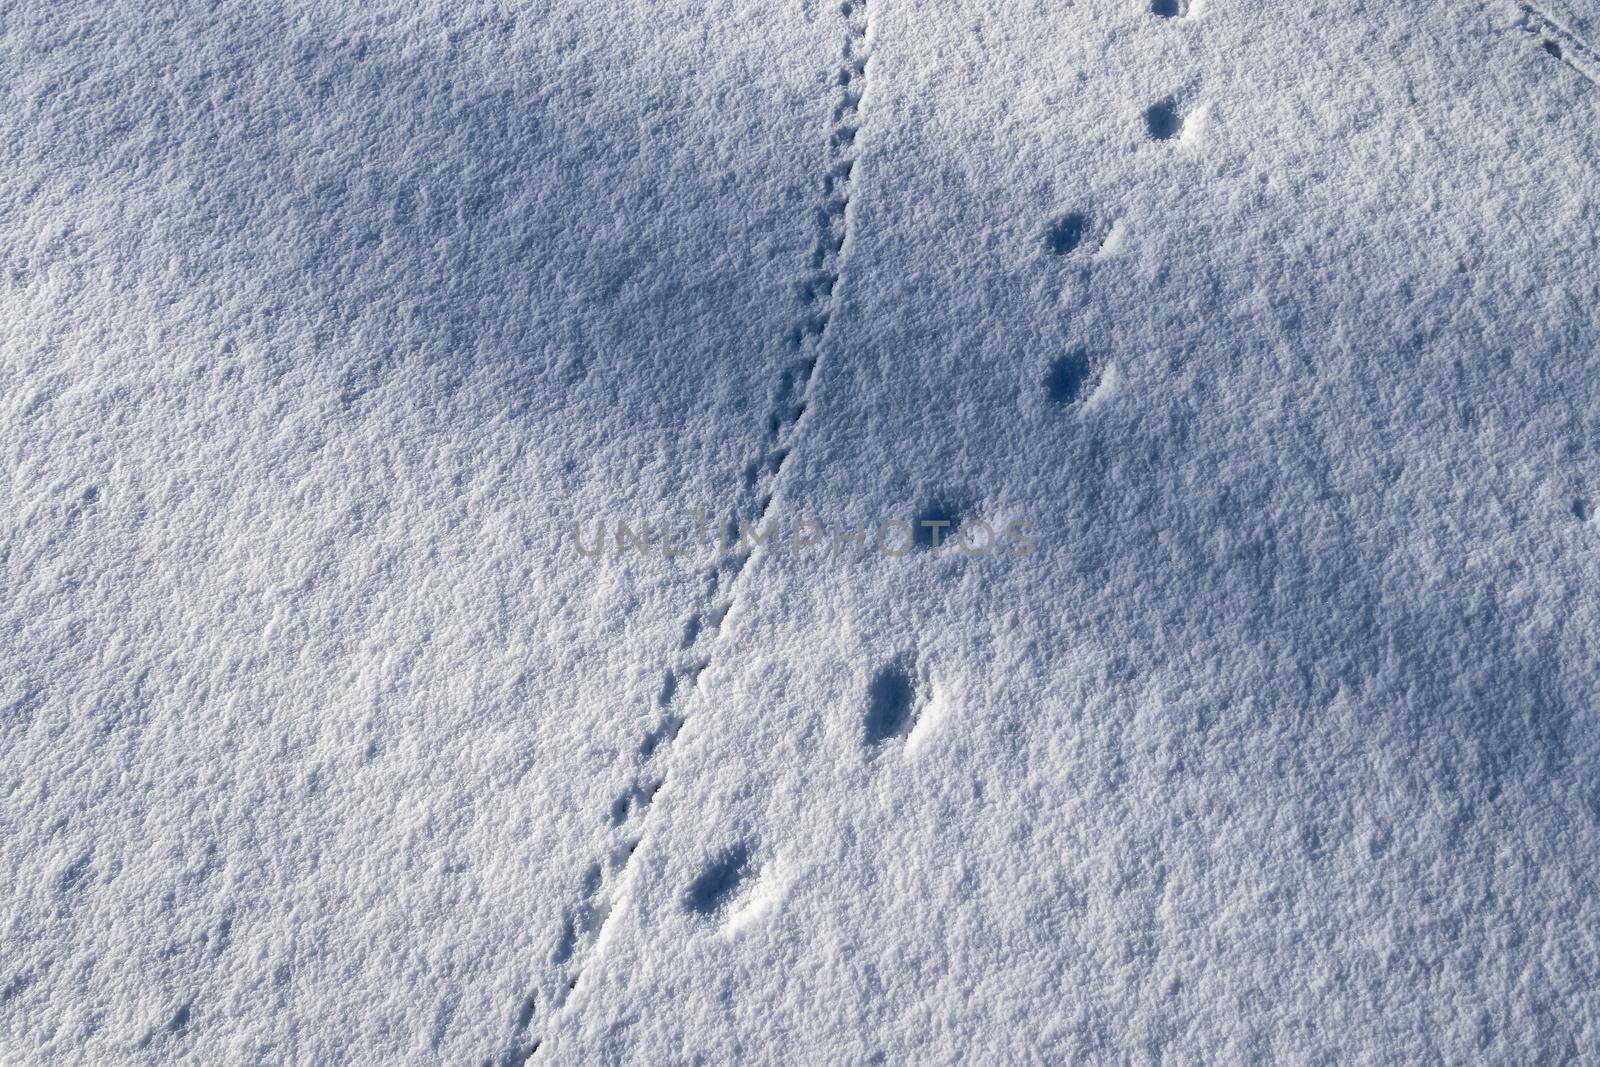 Footprints of animals and birds in fresh white snow in winter by MP_foto71